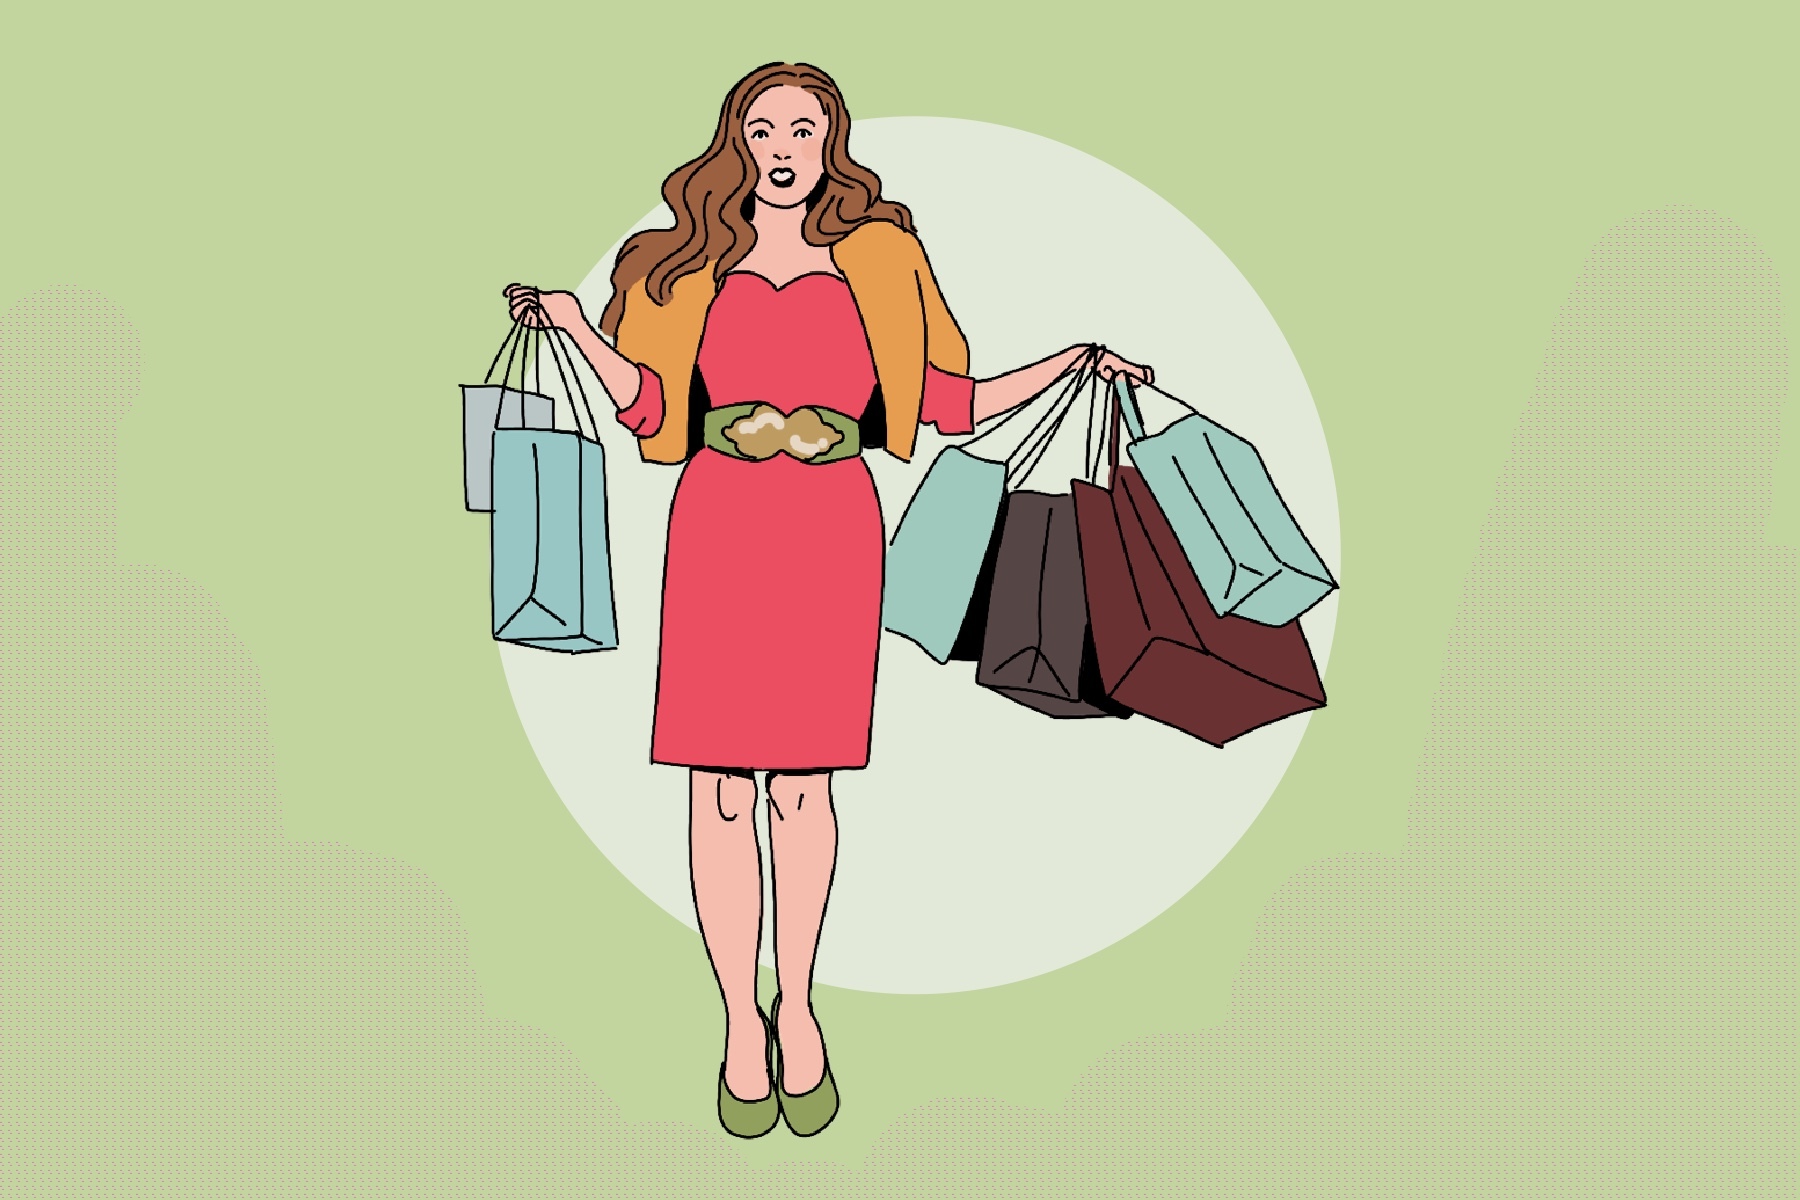 confessions of a shopaholic main character